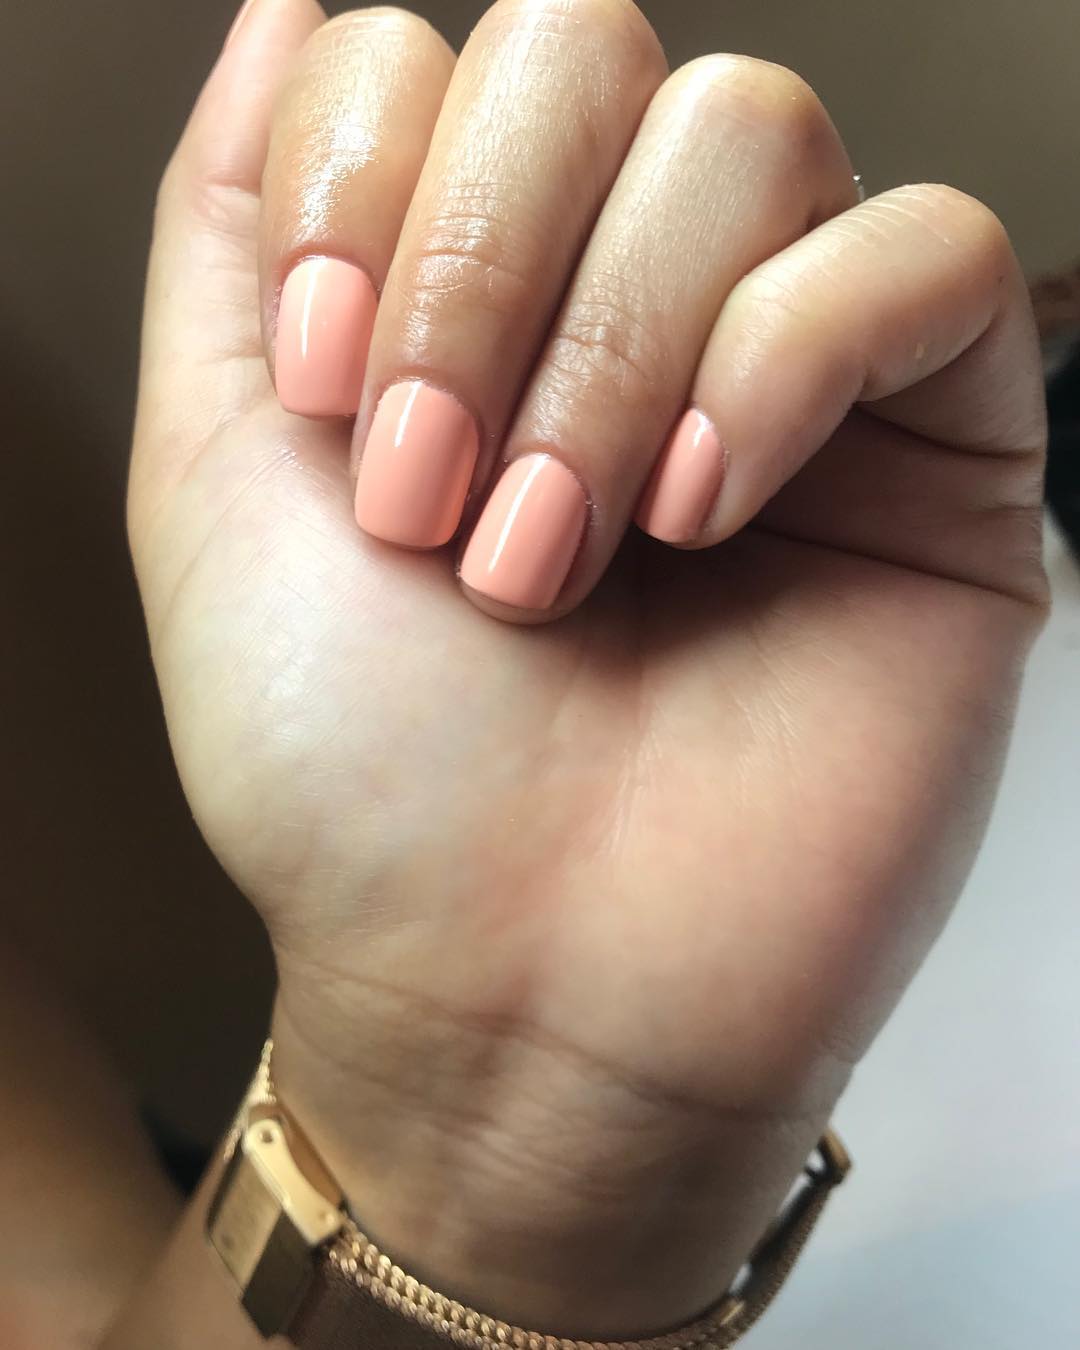 Peachy nails. Pic by glow_glam_